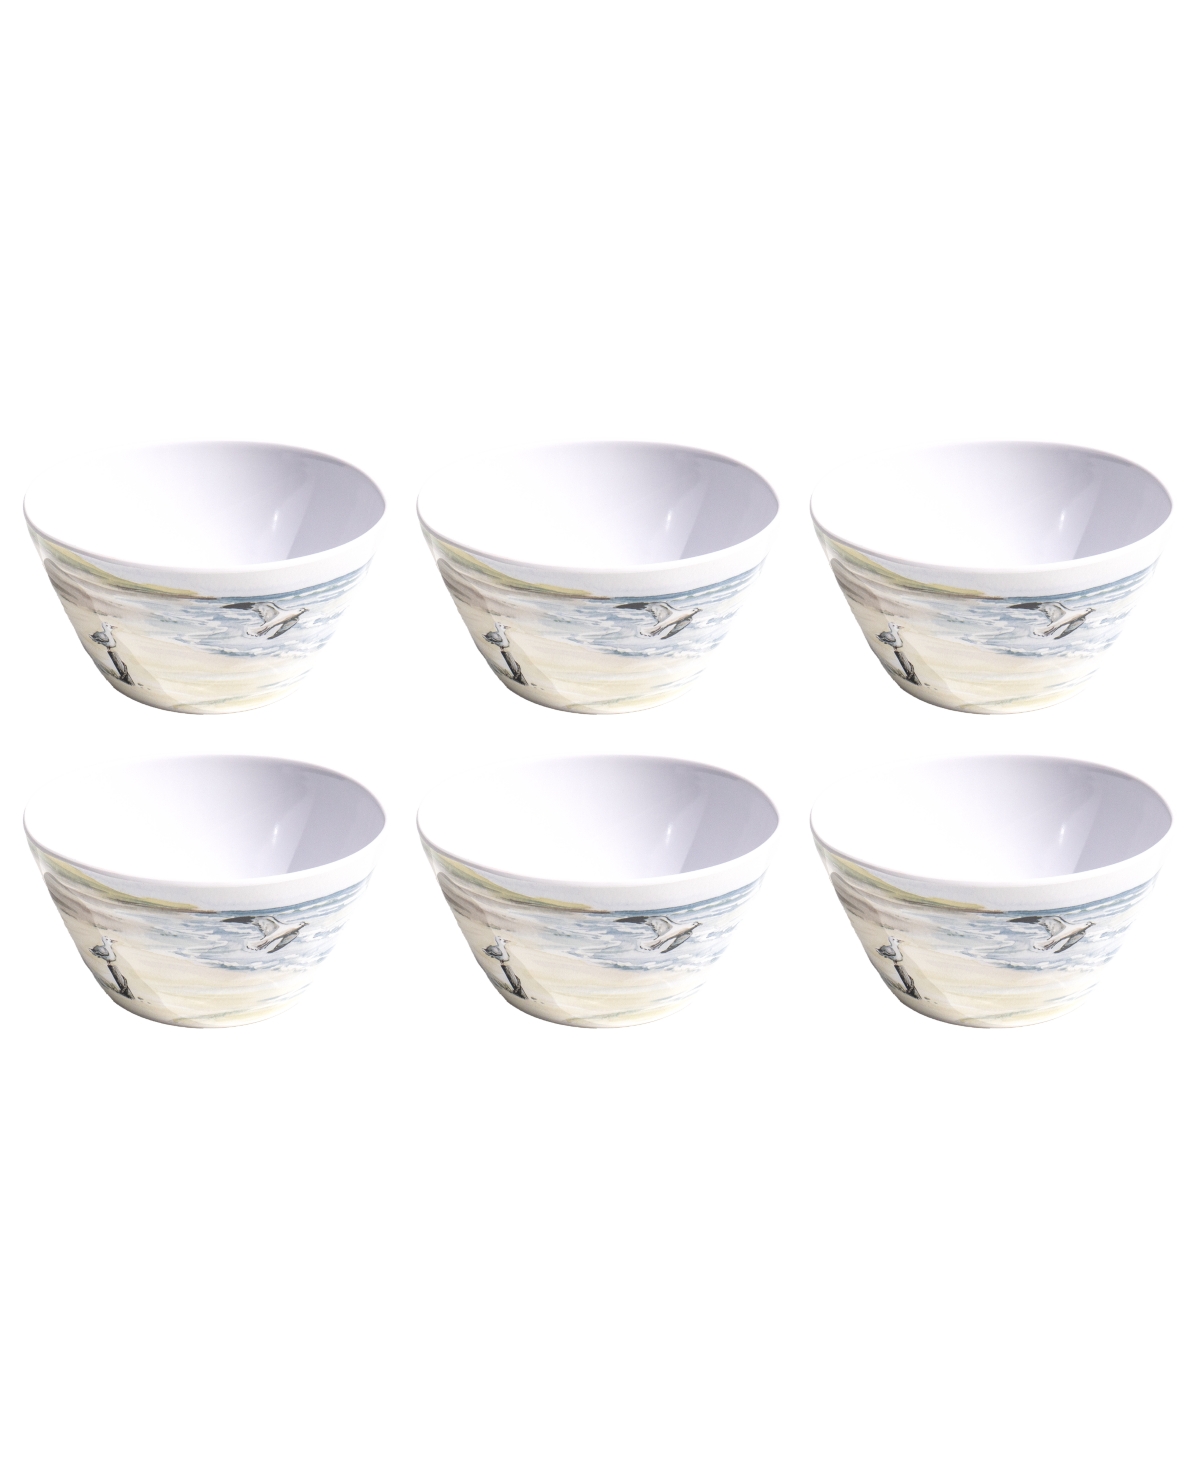 By The Shore 5.9" Cereal Bowls 28 oz, Set of 6, Service for 6 - White